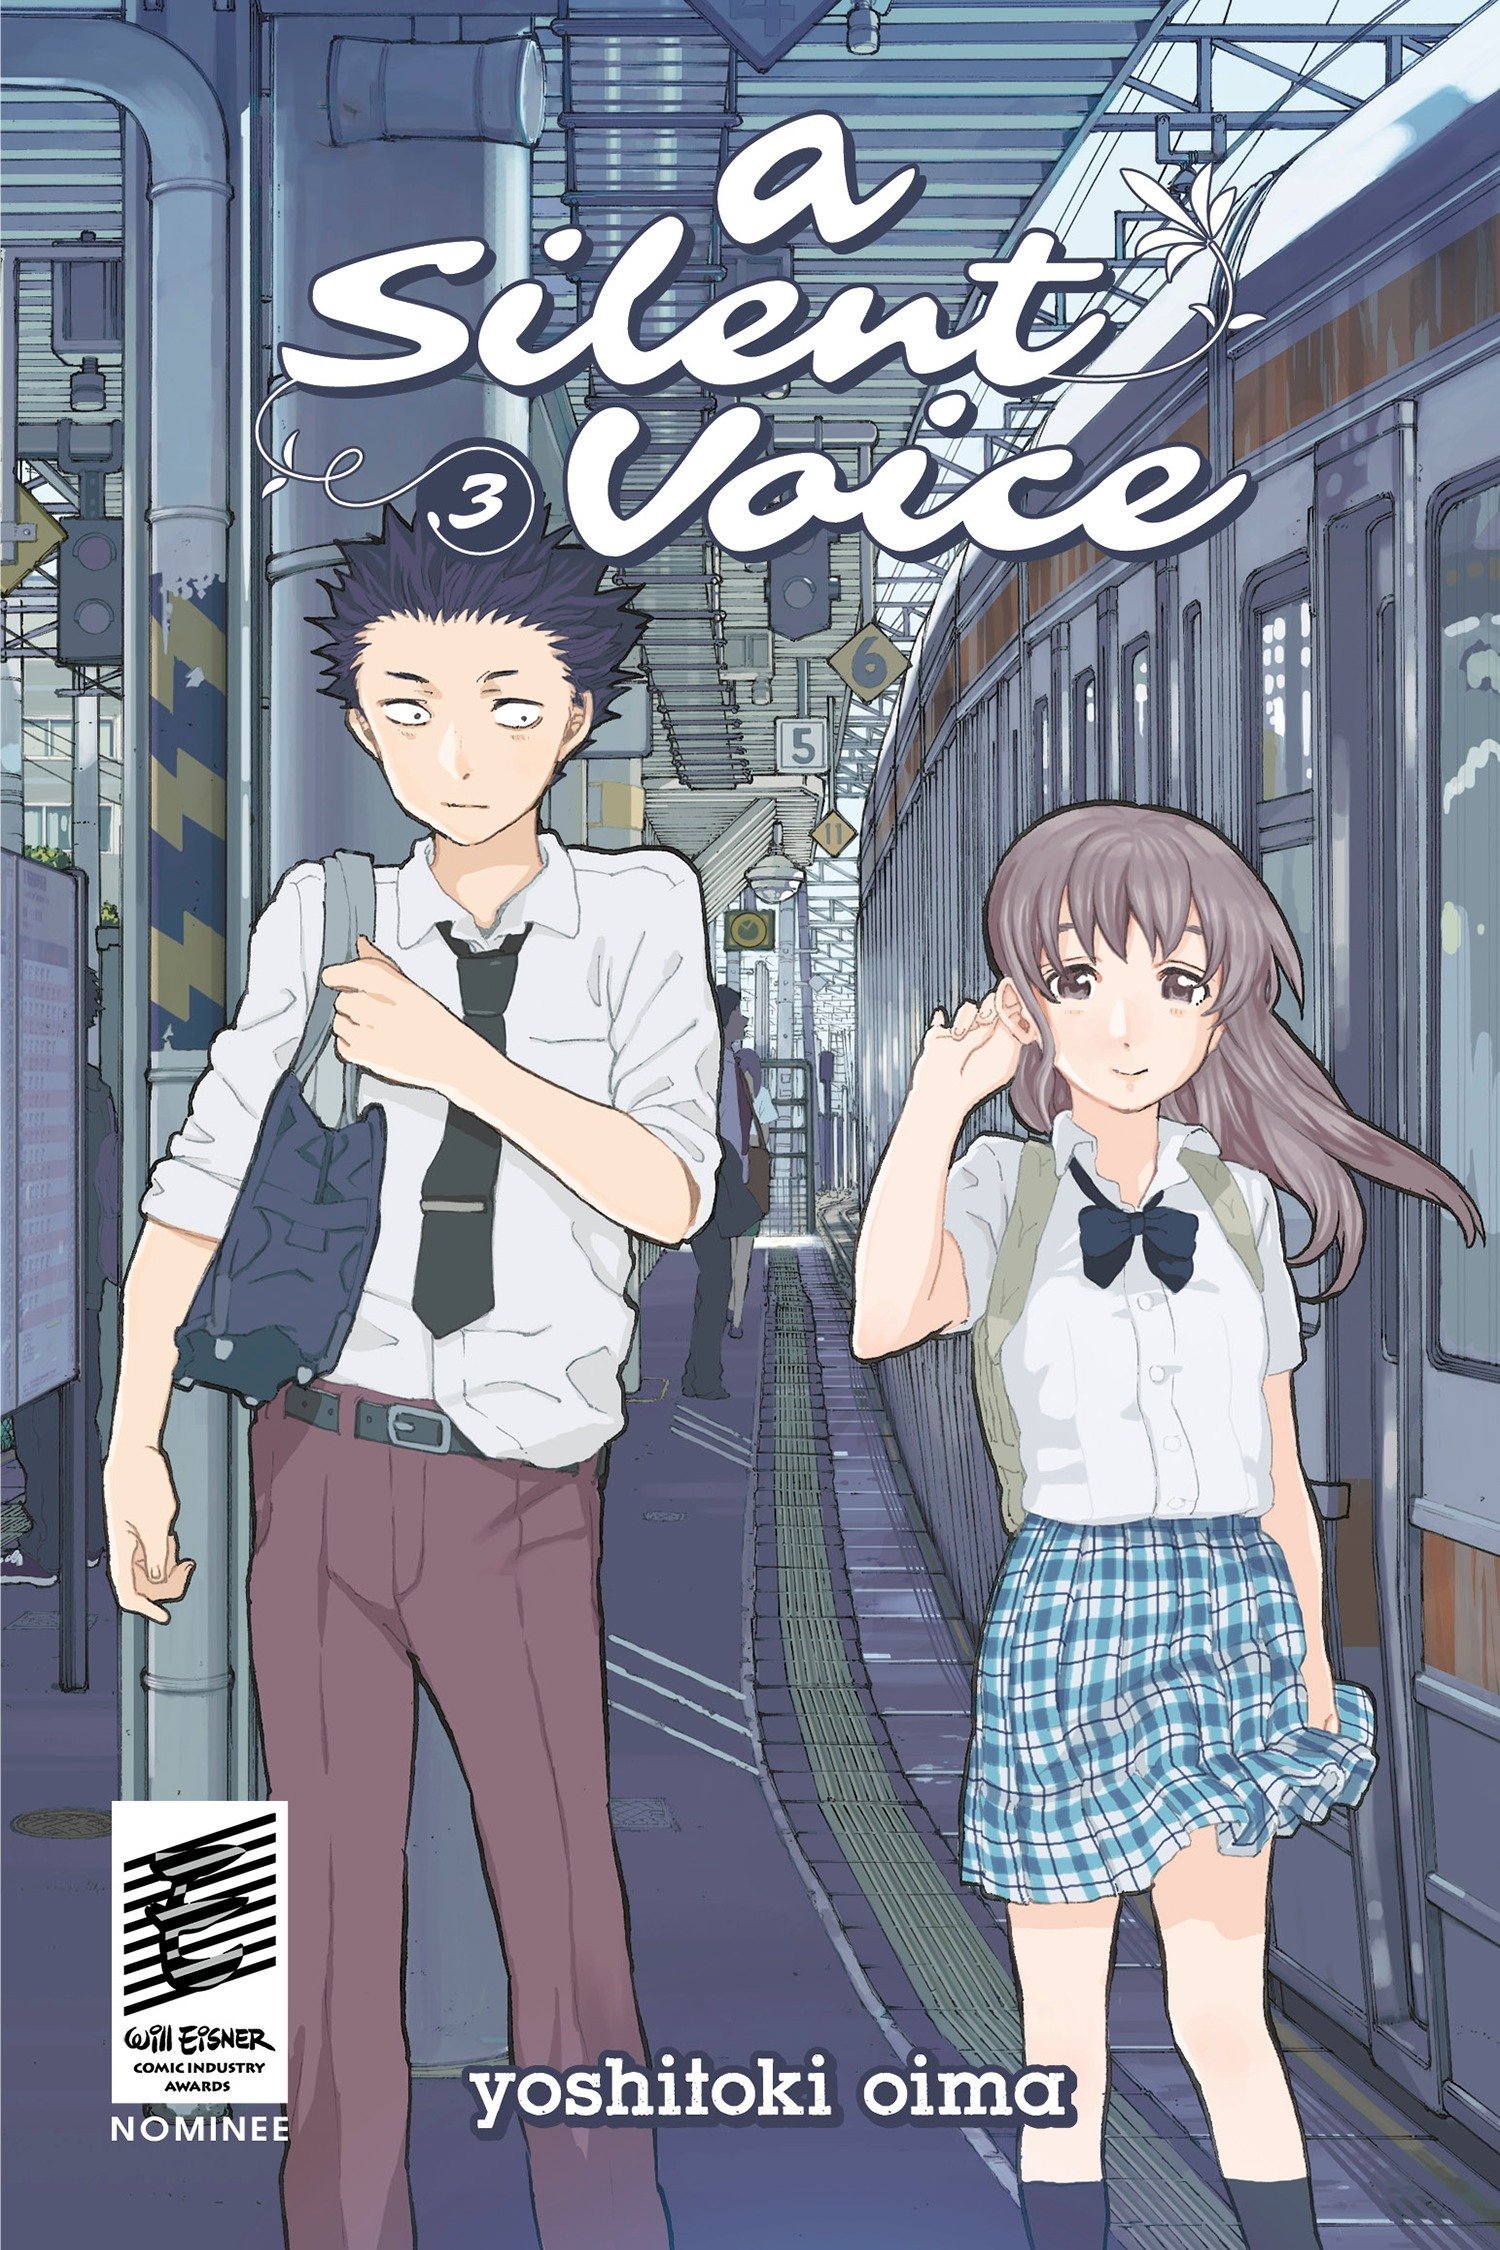 The 100 Best Comics of the Decade: A Silent Voice